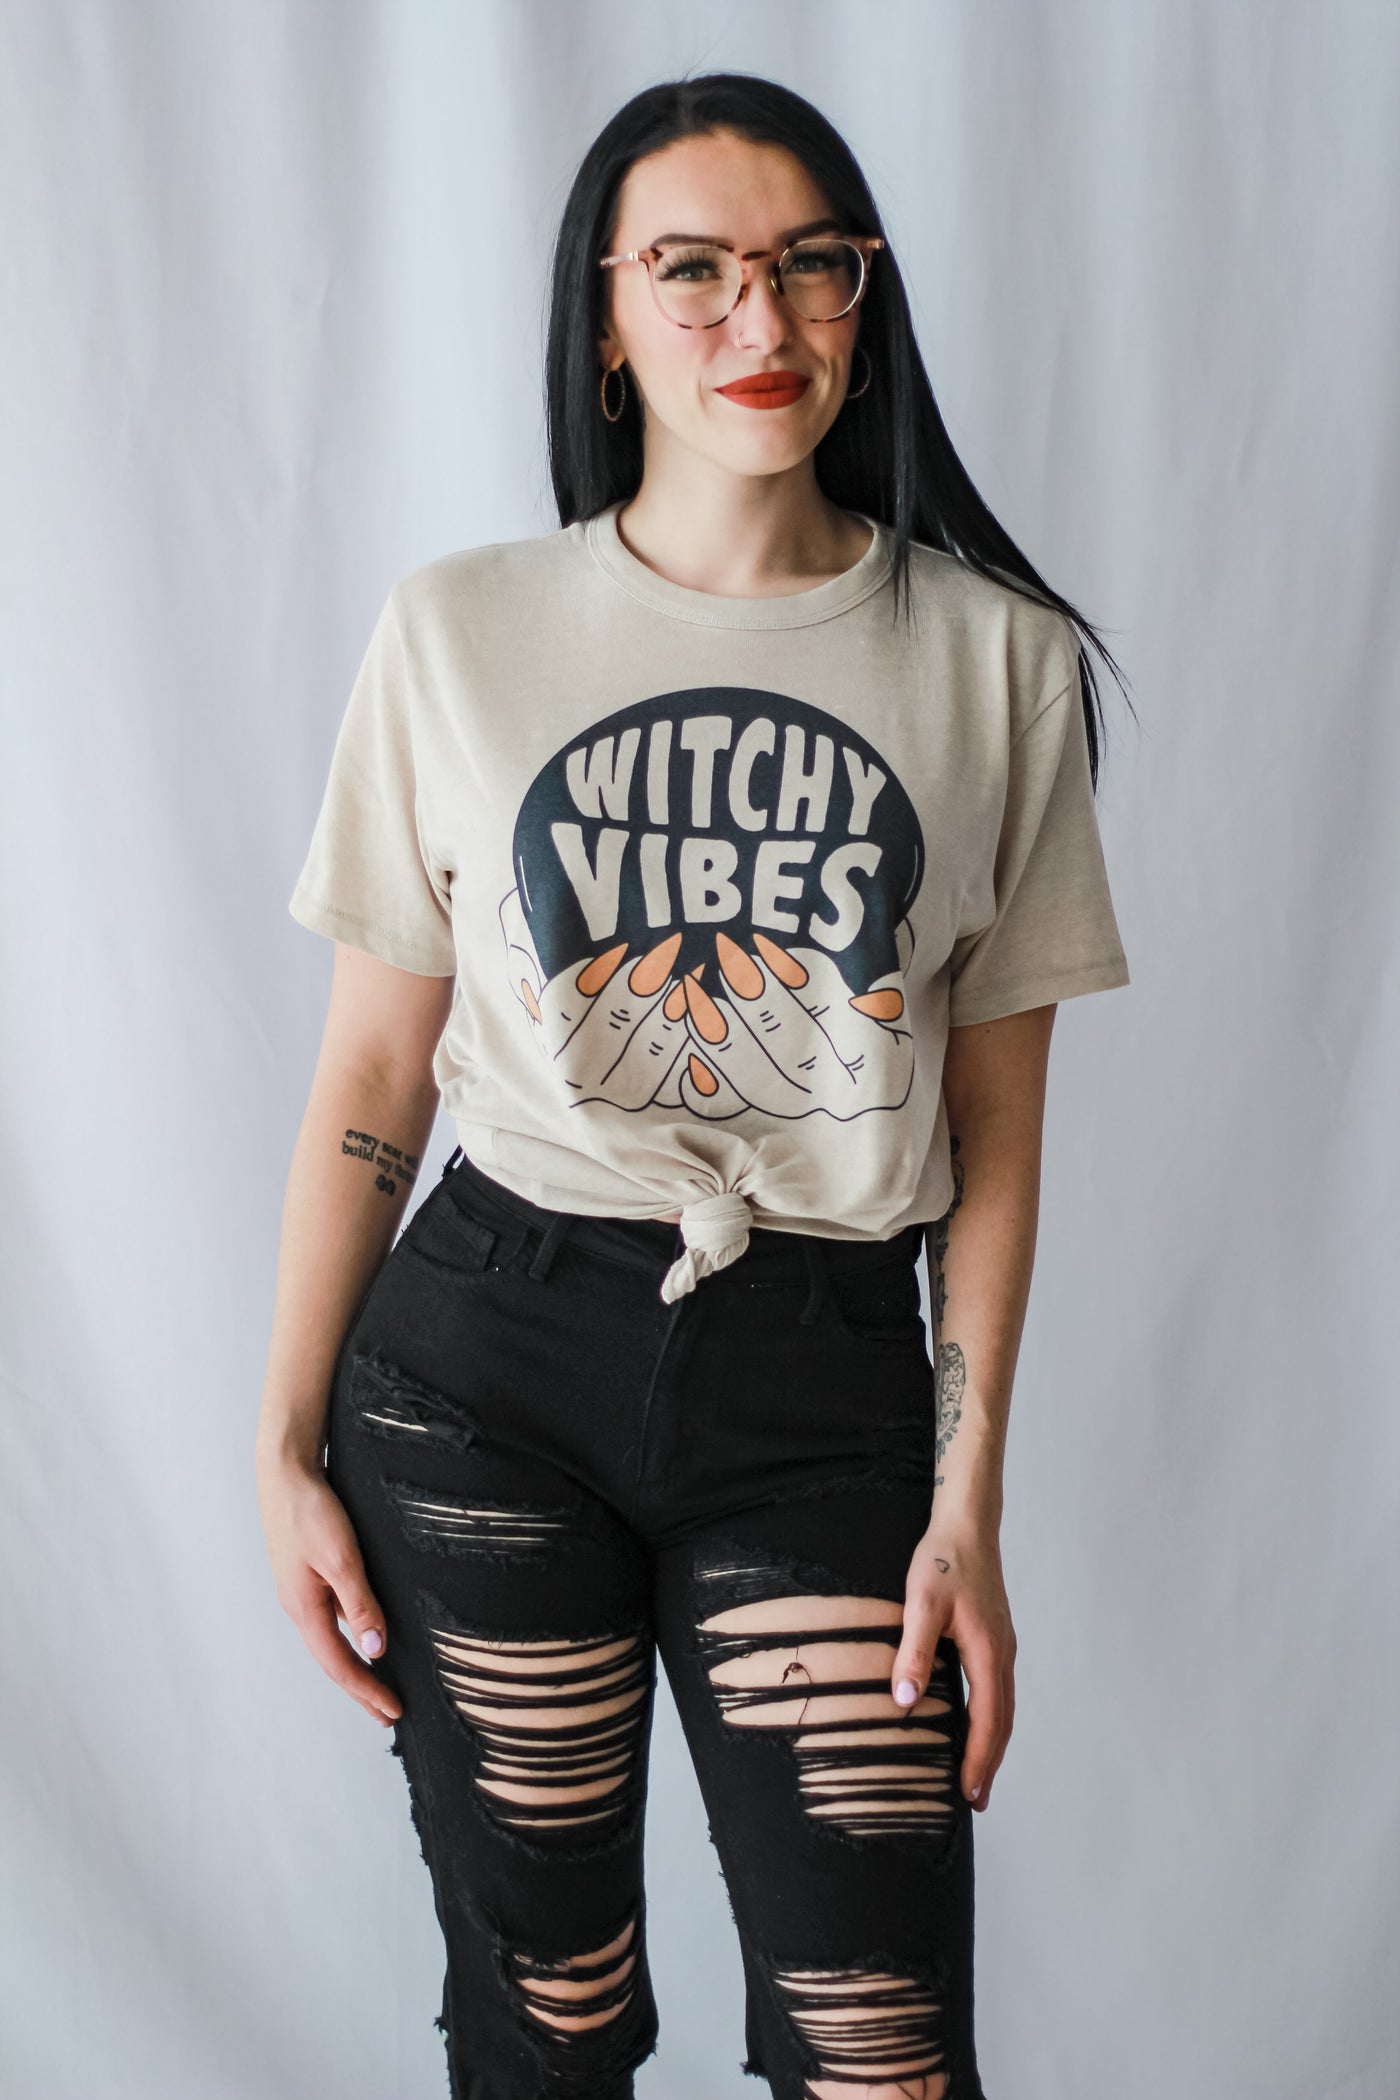 Witchy Vibes Crystal Ball Tee